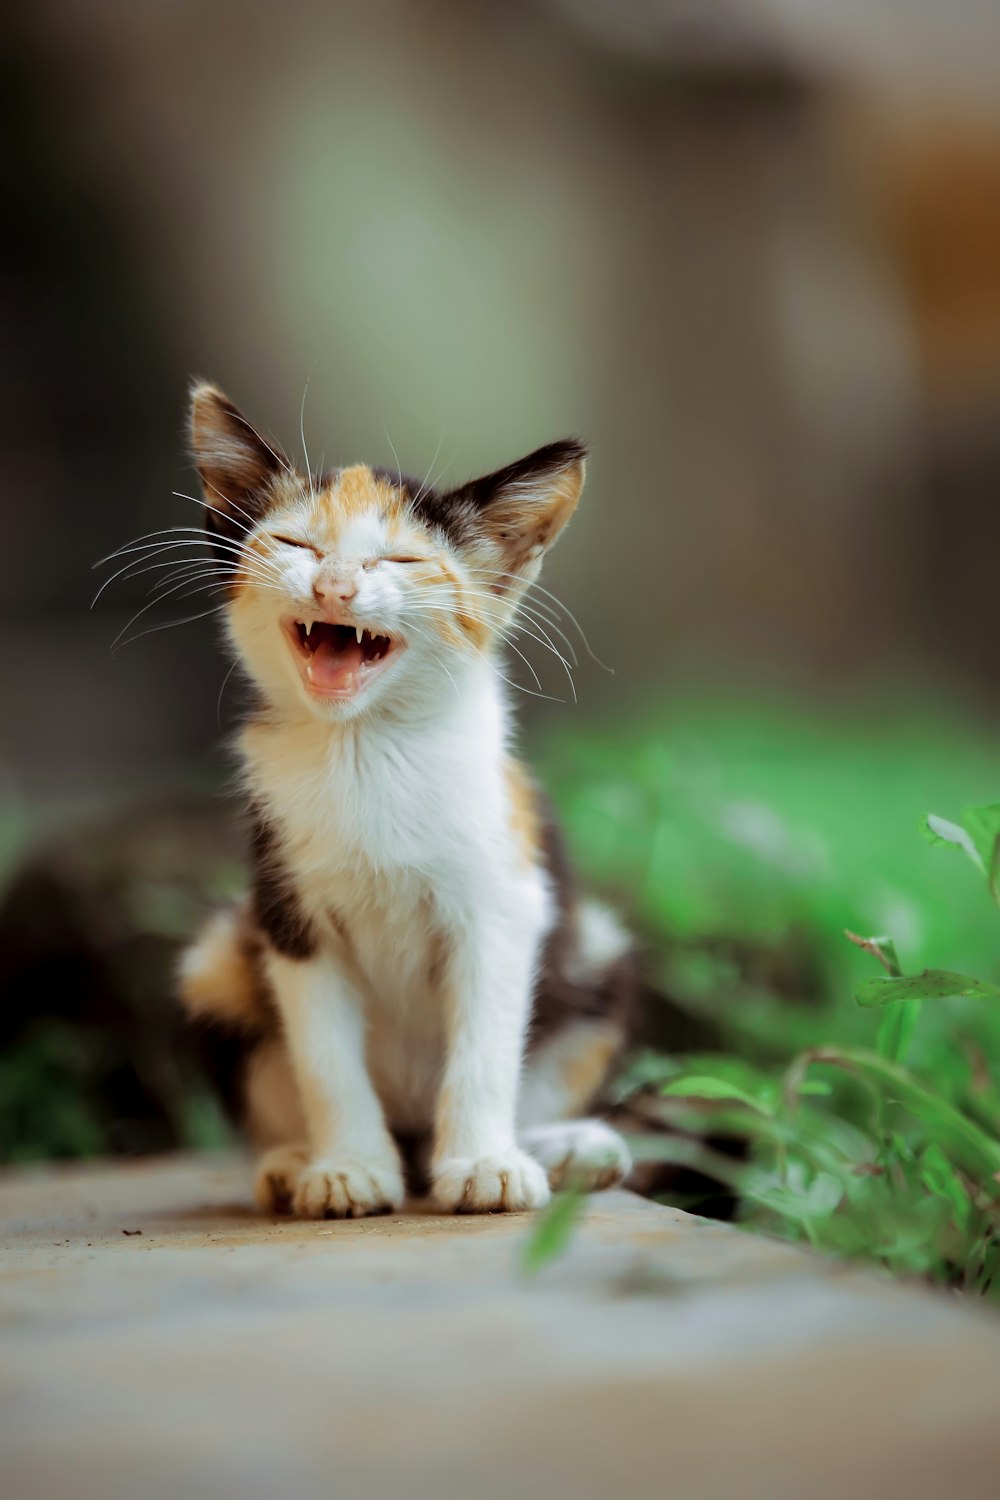 A small kitten yawns while sitting on the ground photo – Free ...